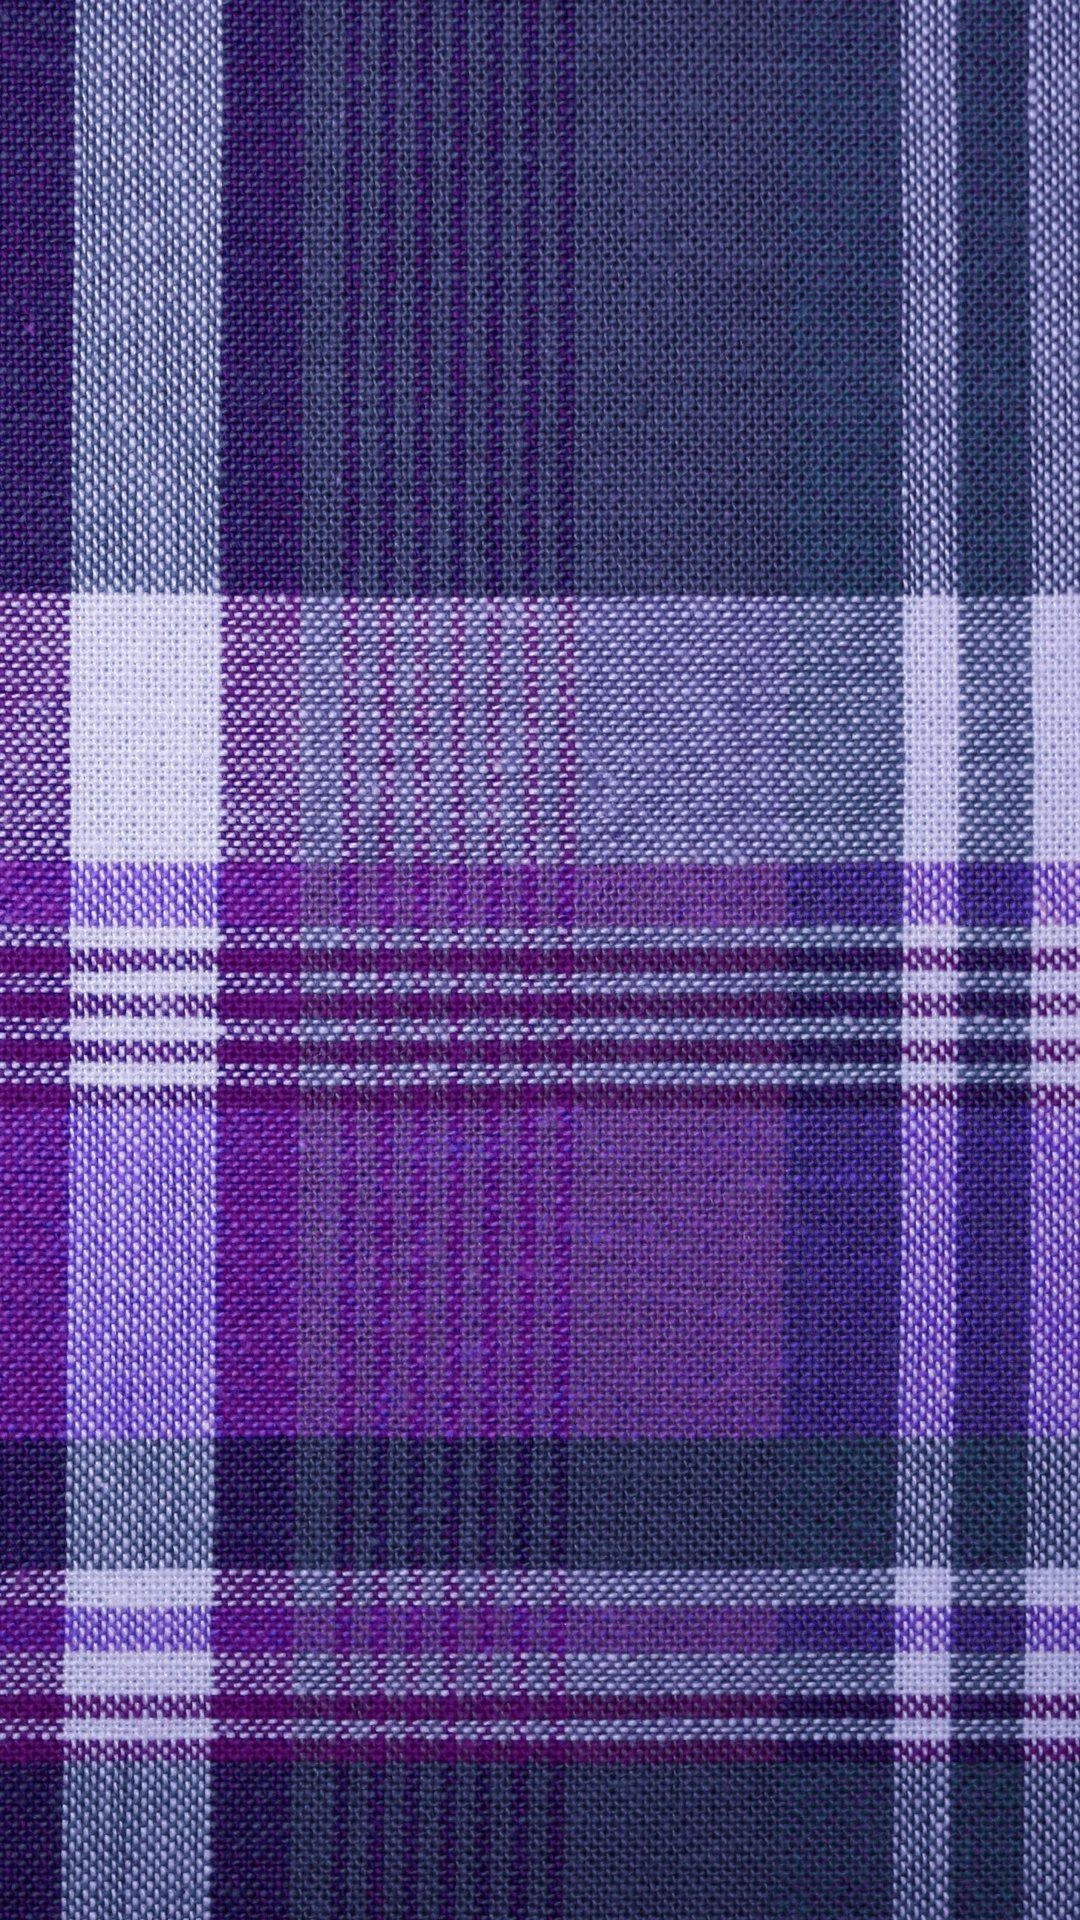 Abstract Carbon Fiber Iphone 6 Plus Wallpapers - Pink And Purple Plaid - HD Wallpaper 